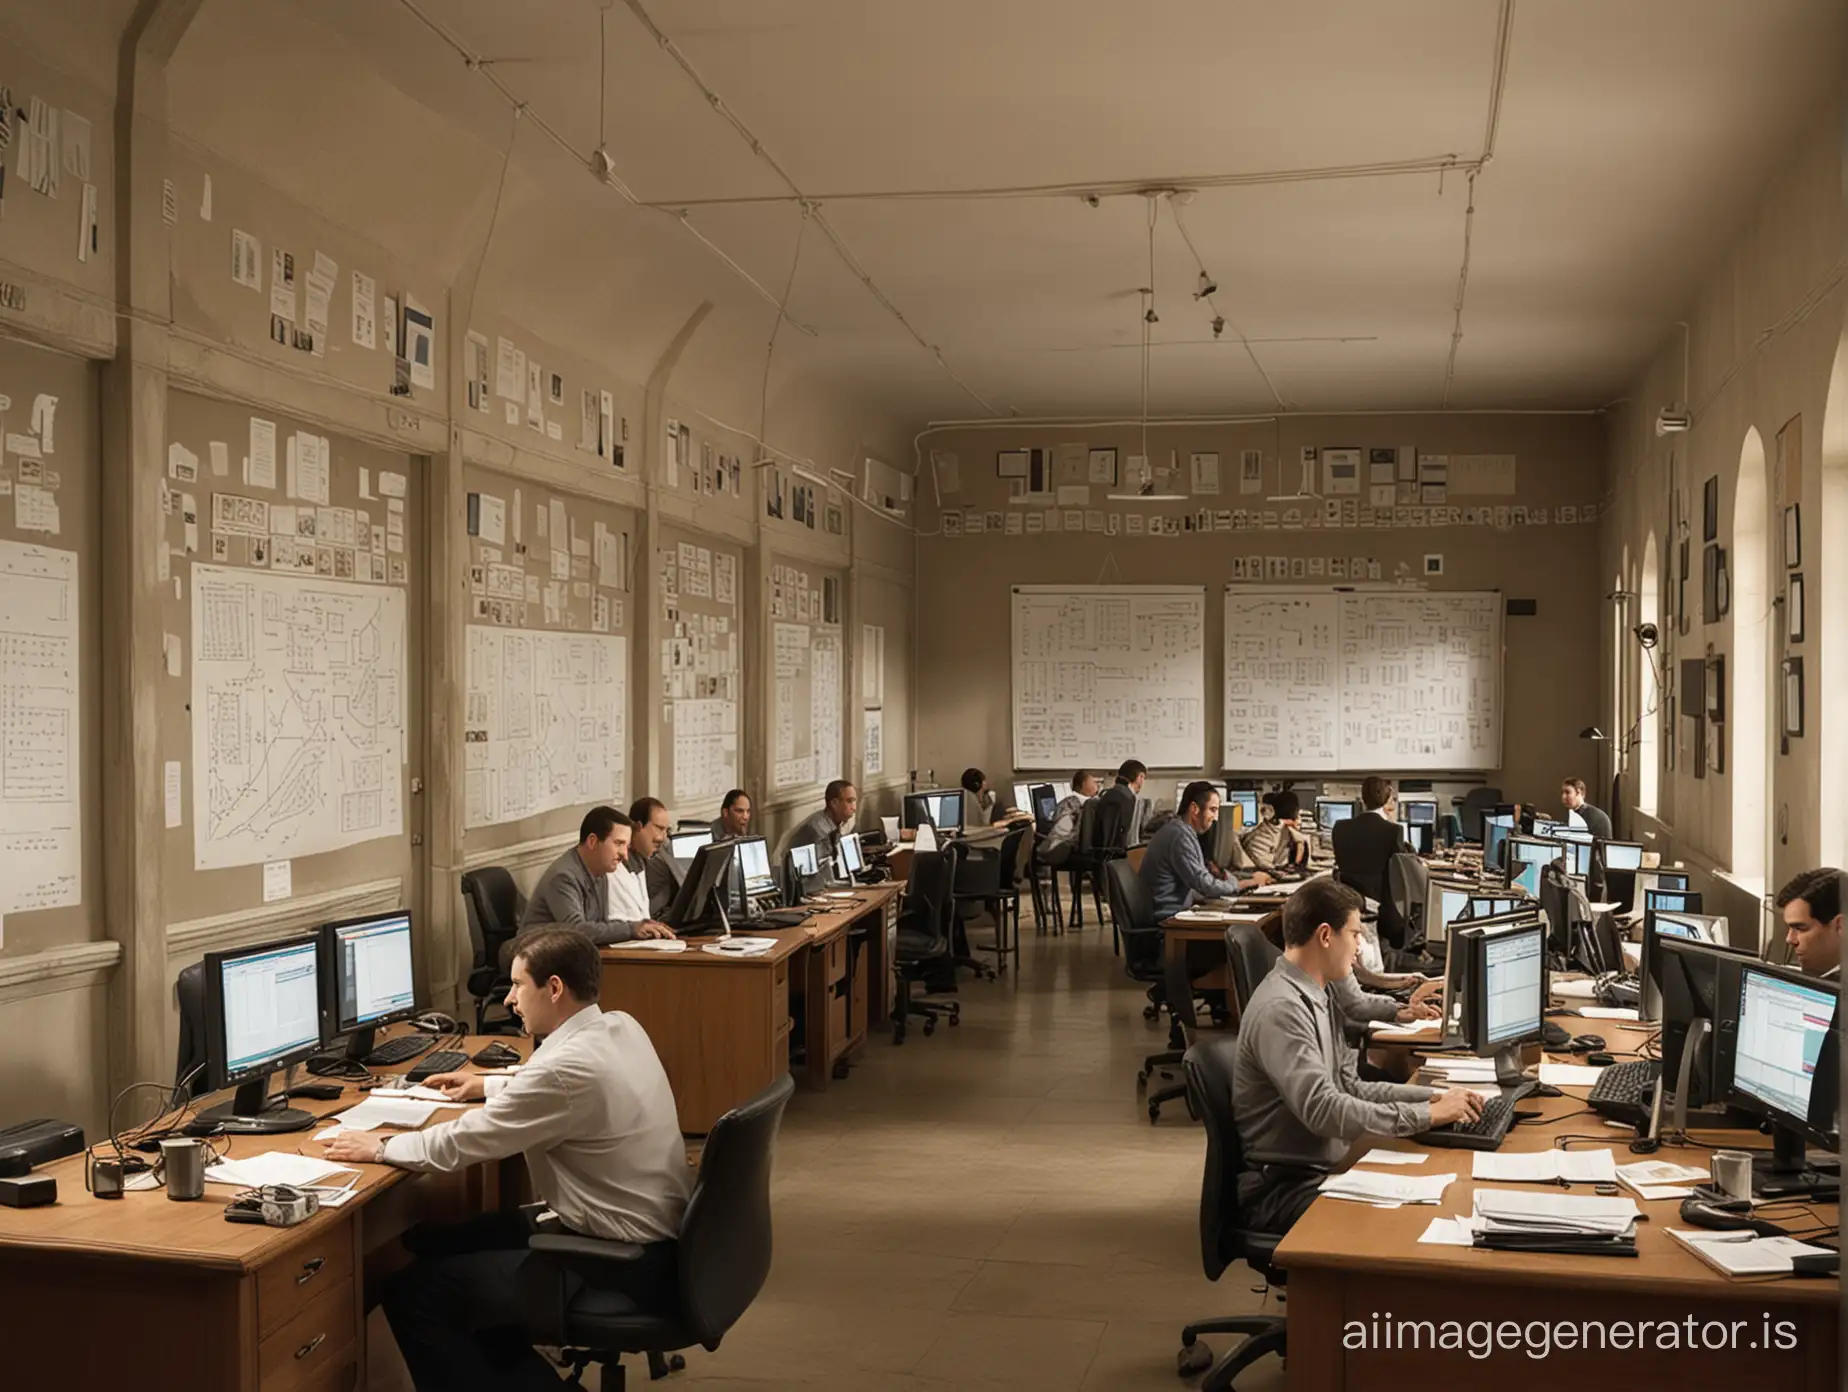 Eight men sit at computers in a beautiful hall, while diagrams and charts hang on the walls.